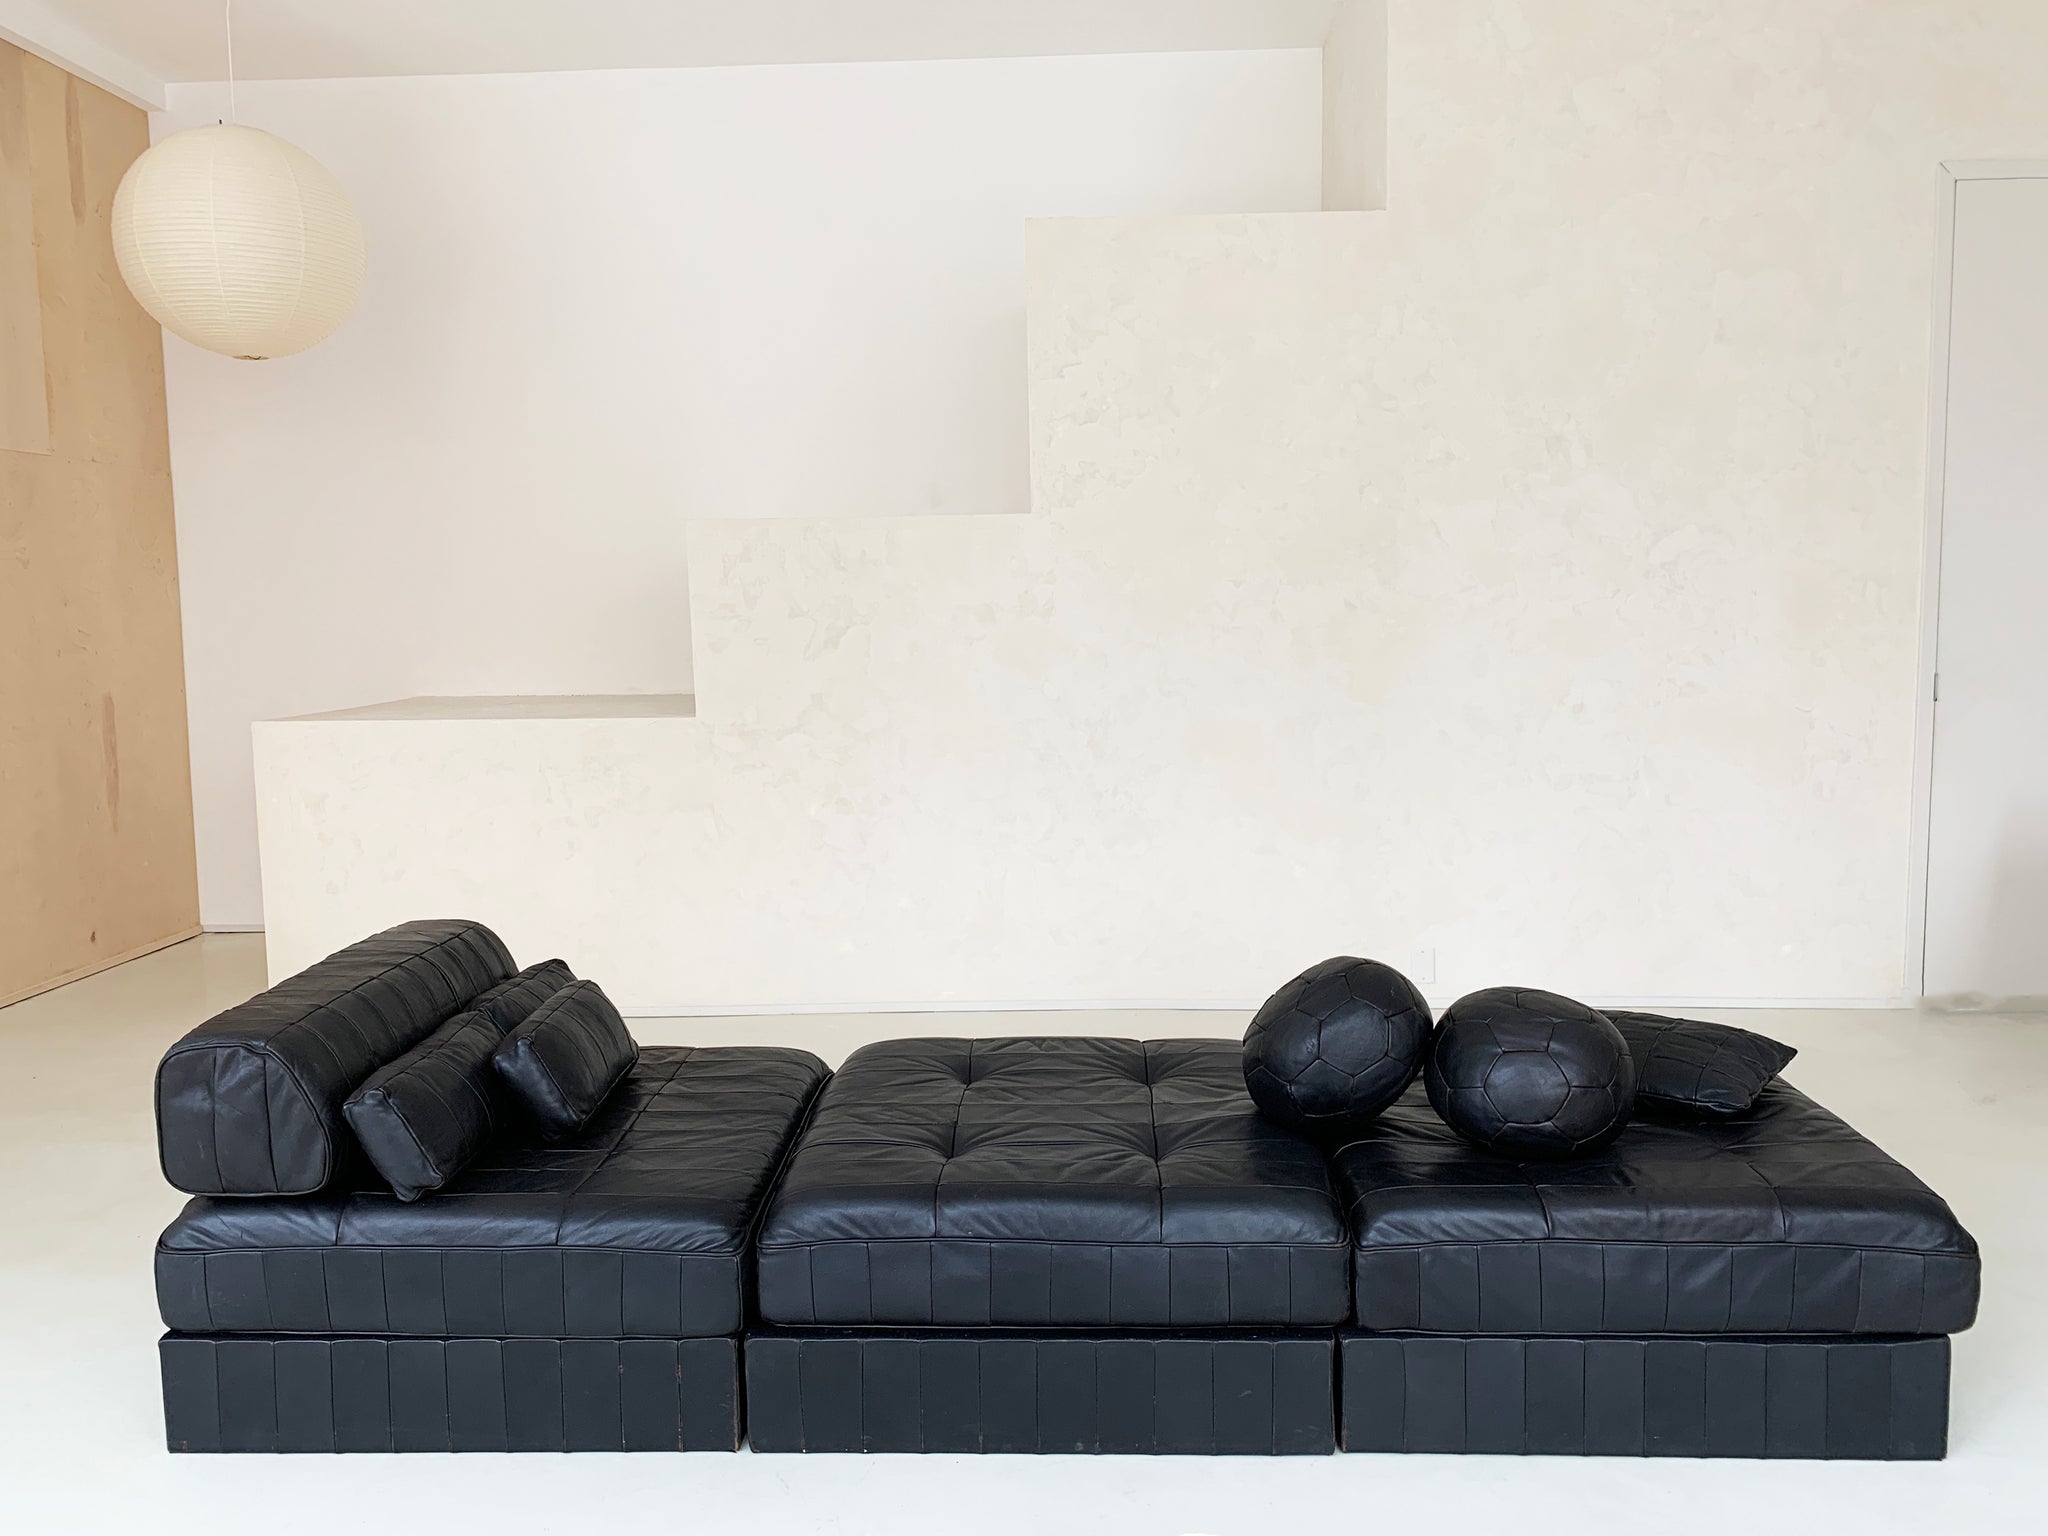 1970s Black Leather Patchwork DS 88 Modular Sofa-Bed by De Sede, Switzerland